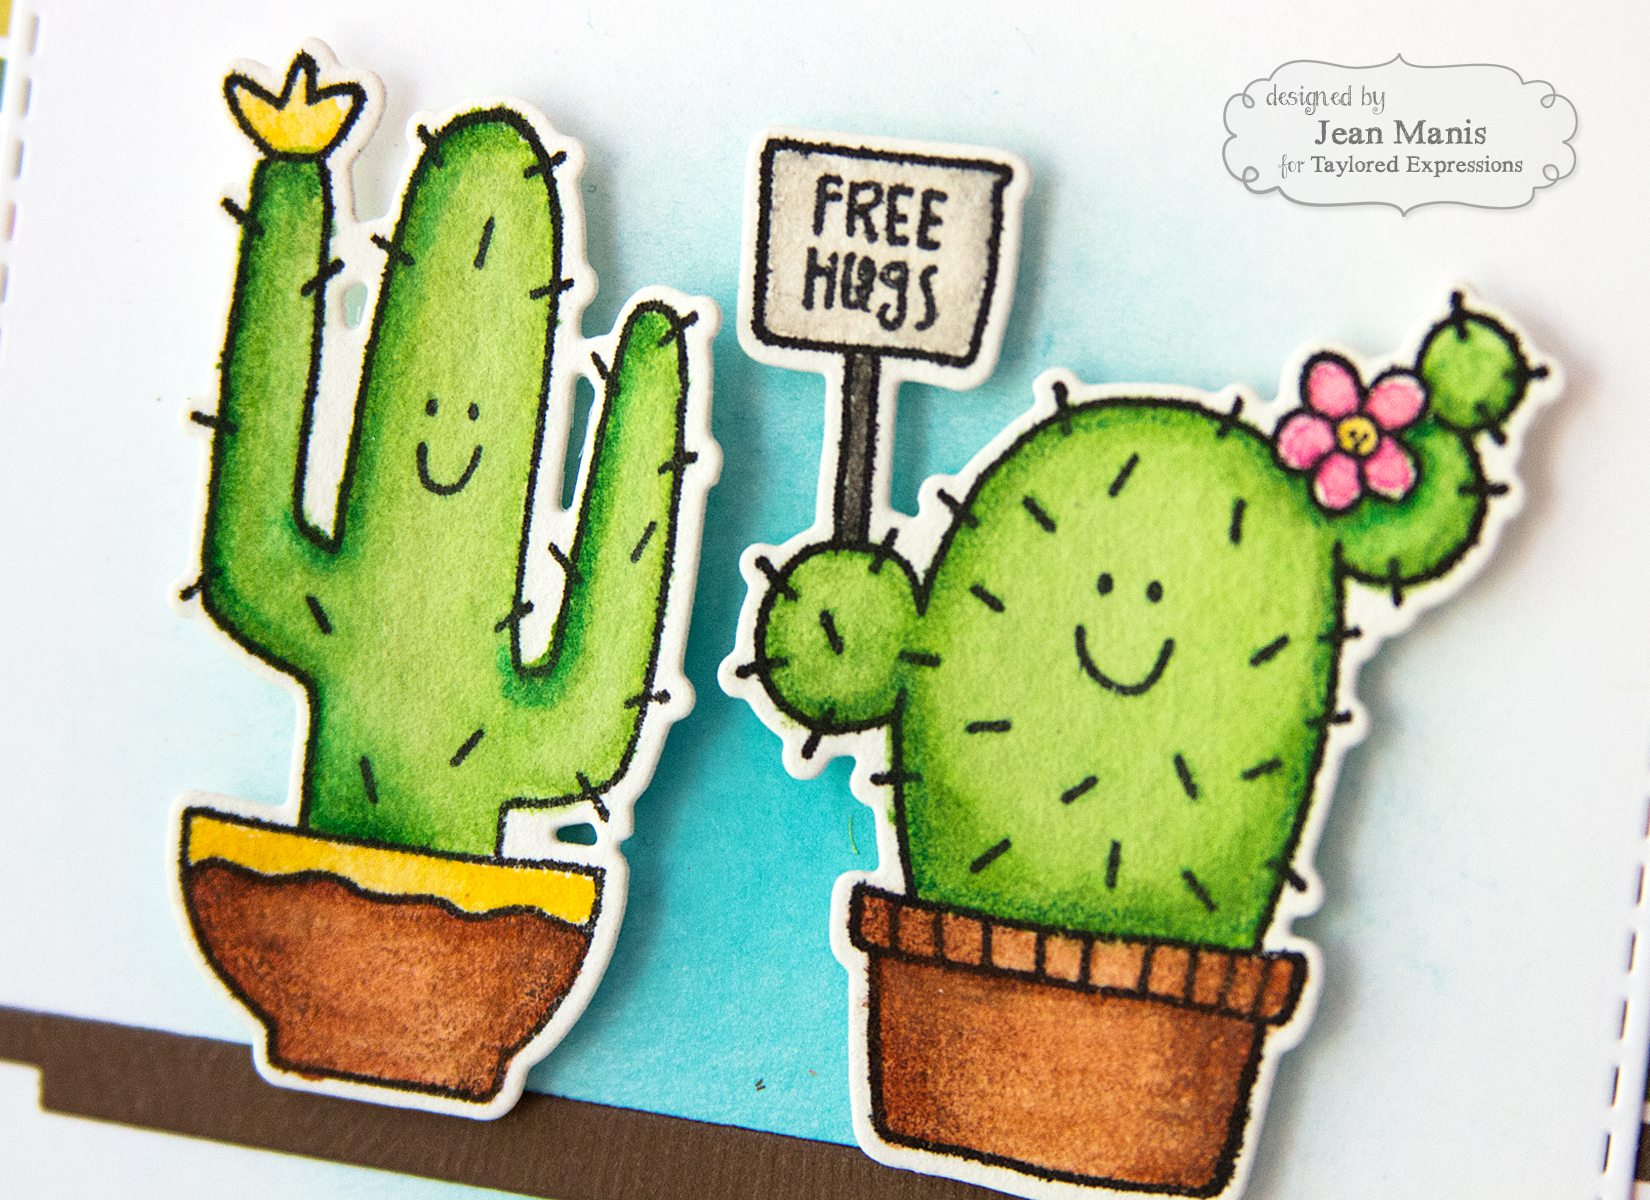 Taylored Expressions Cactus Apology Card